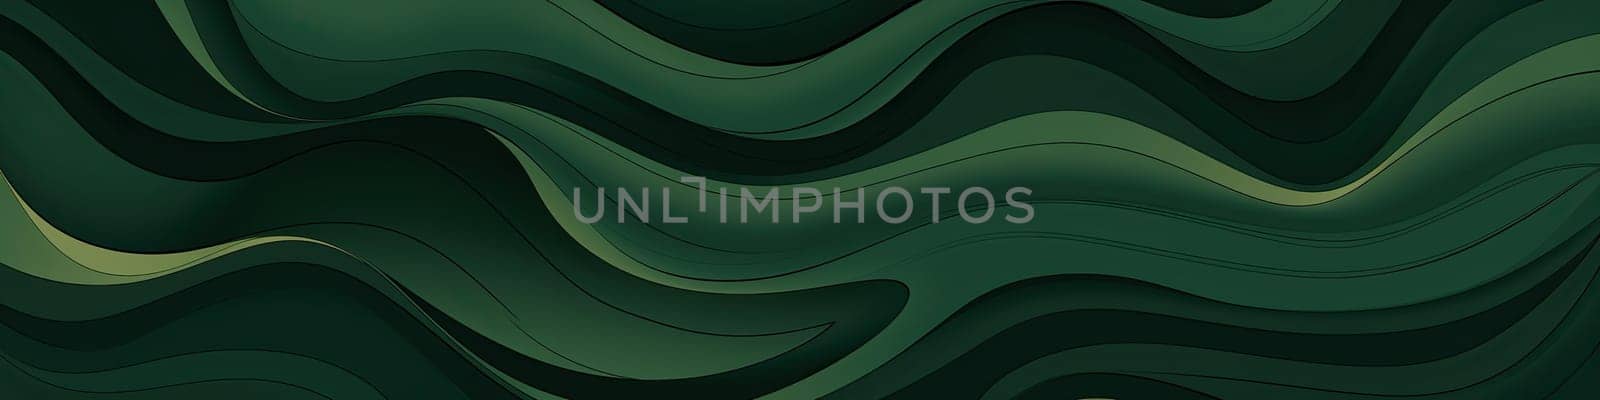 Banner with a green waves background illustration with dark olive drab by Kadula